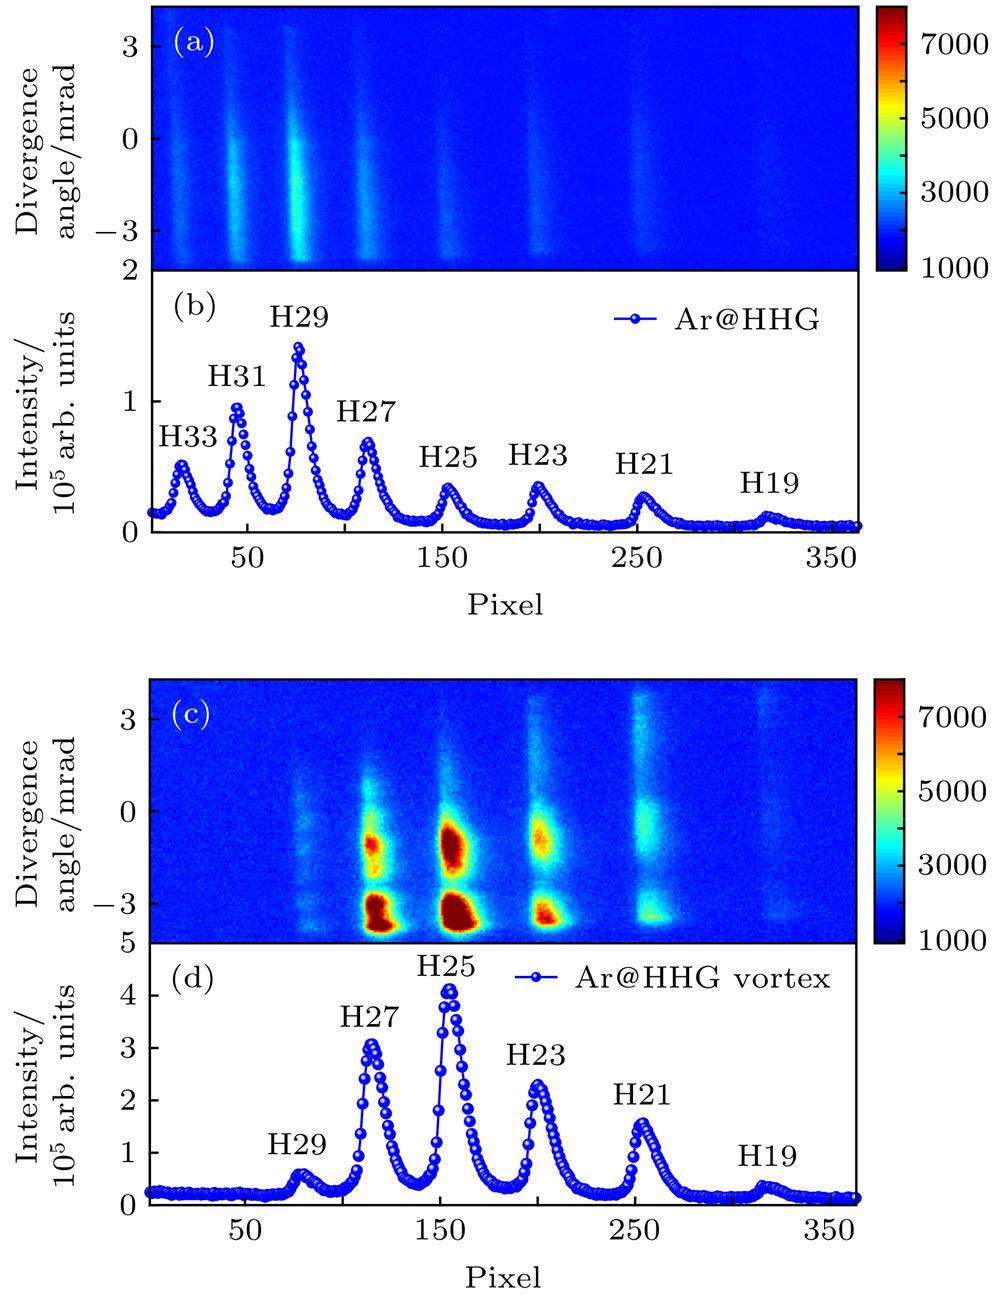 Part of the HHG spectrum of Ar atoms at 90 torr irradiated by a 800 nm, 35 fs linearly polarized and radially polarized driving laser field with laser energy of 1.0 mJ: (a) Part of the HHG spectrum produced by a Gaussian driving beam; (b) the corresponding integrated HHG intensity; (c) part of the HHG spectrum produced by a radially polarized driving beam; (d) the corresponding integrated HHG intensity. The x-order of the harmonics are labeled as Hx in the figure.